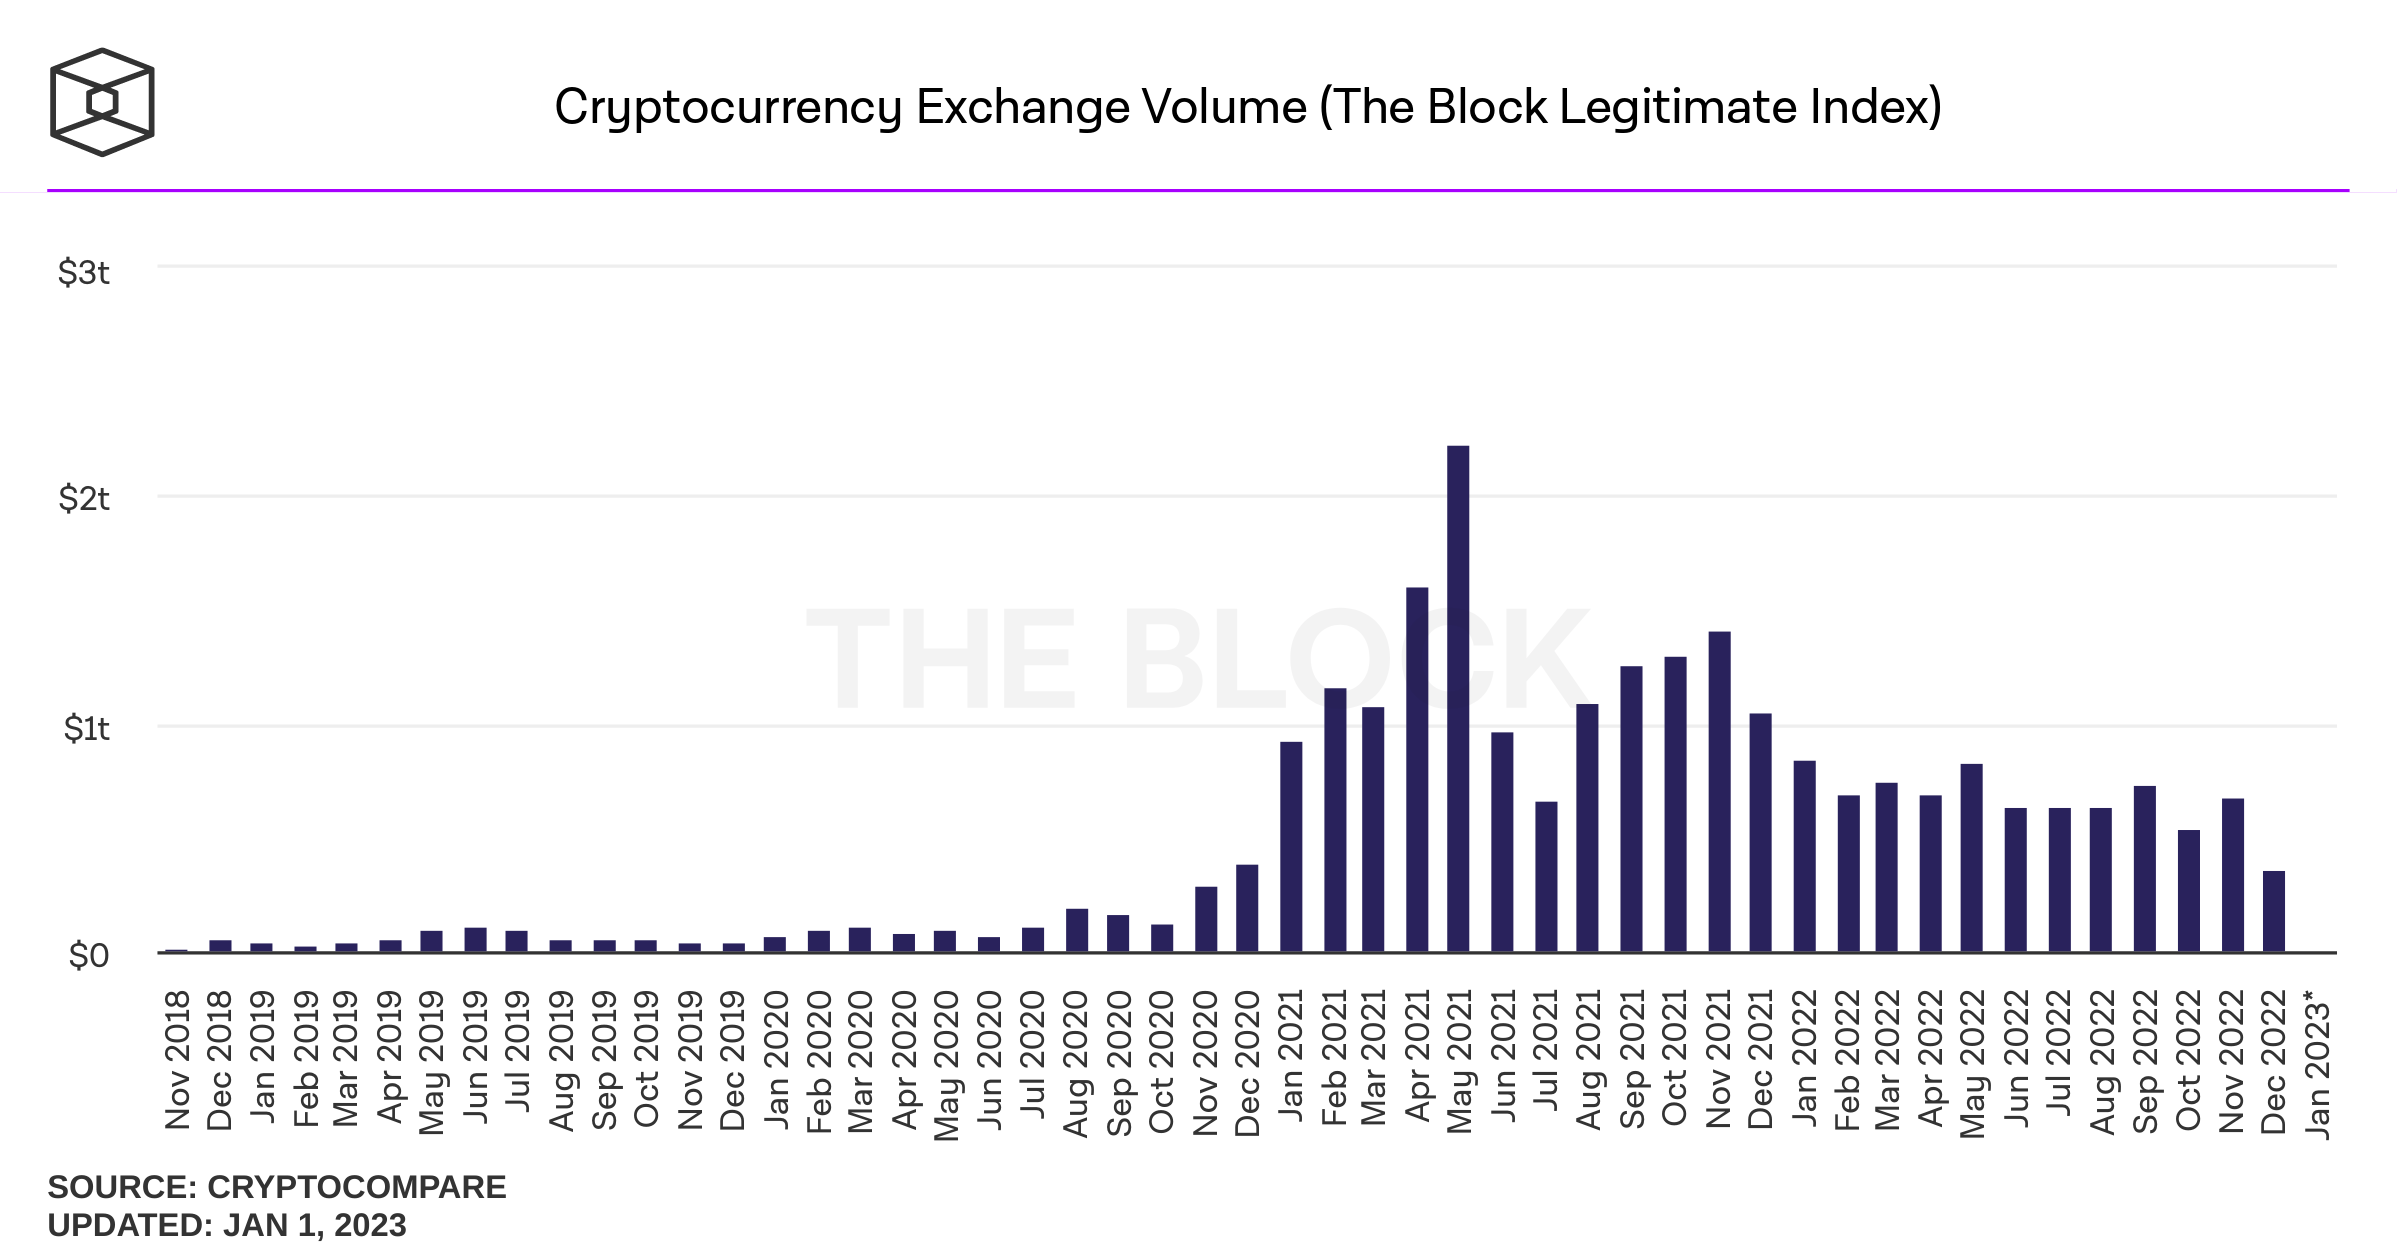 Top Cryptocurrency Exchanges Ranked By Volume | CoinMarketCap